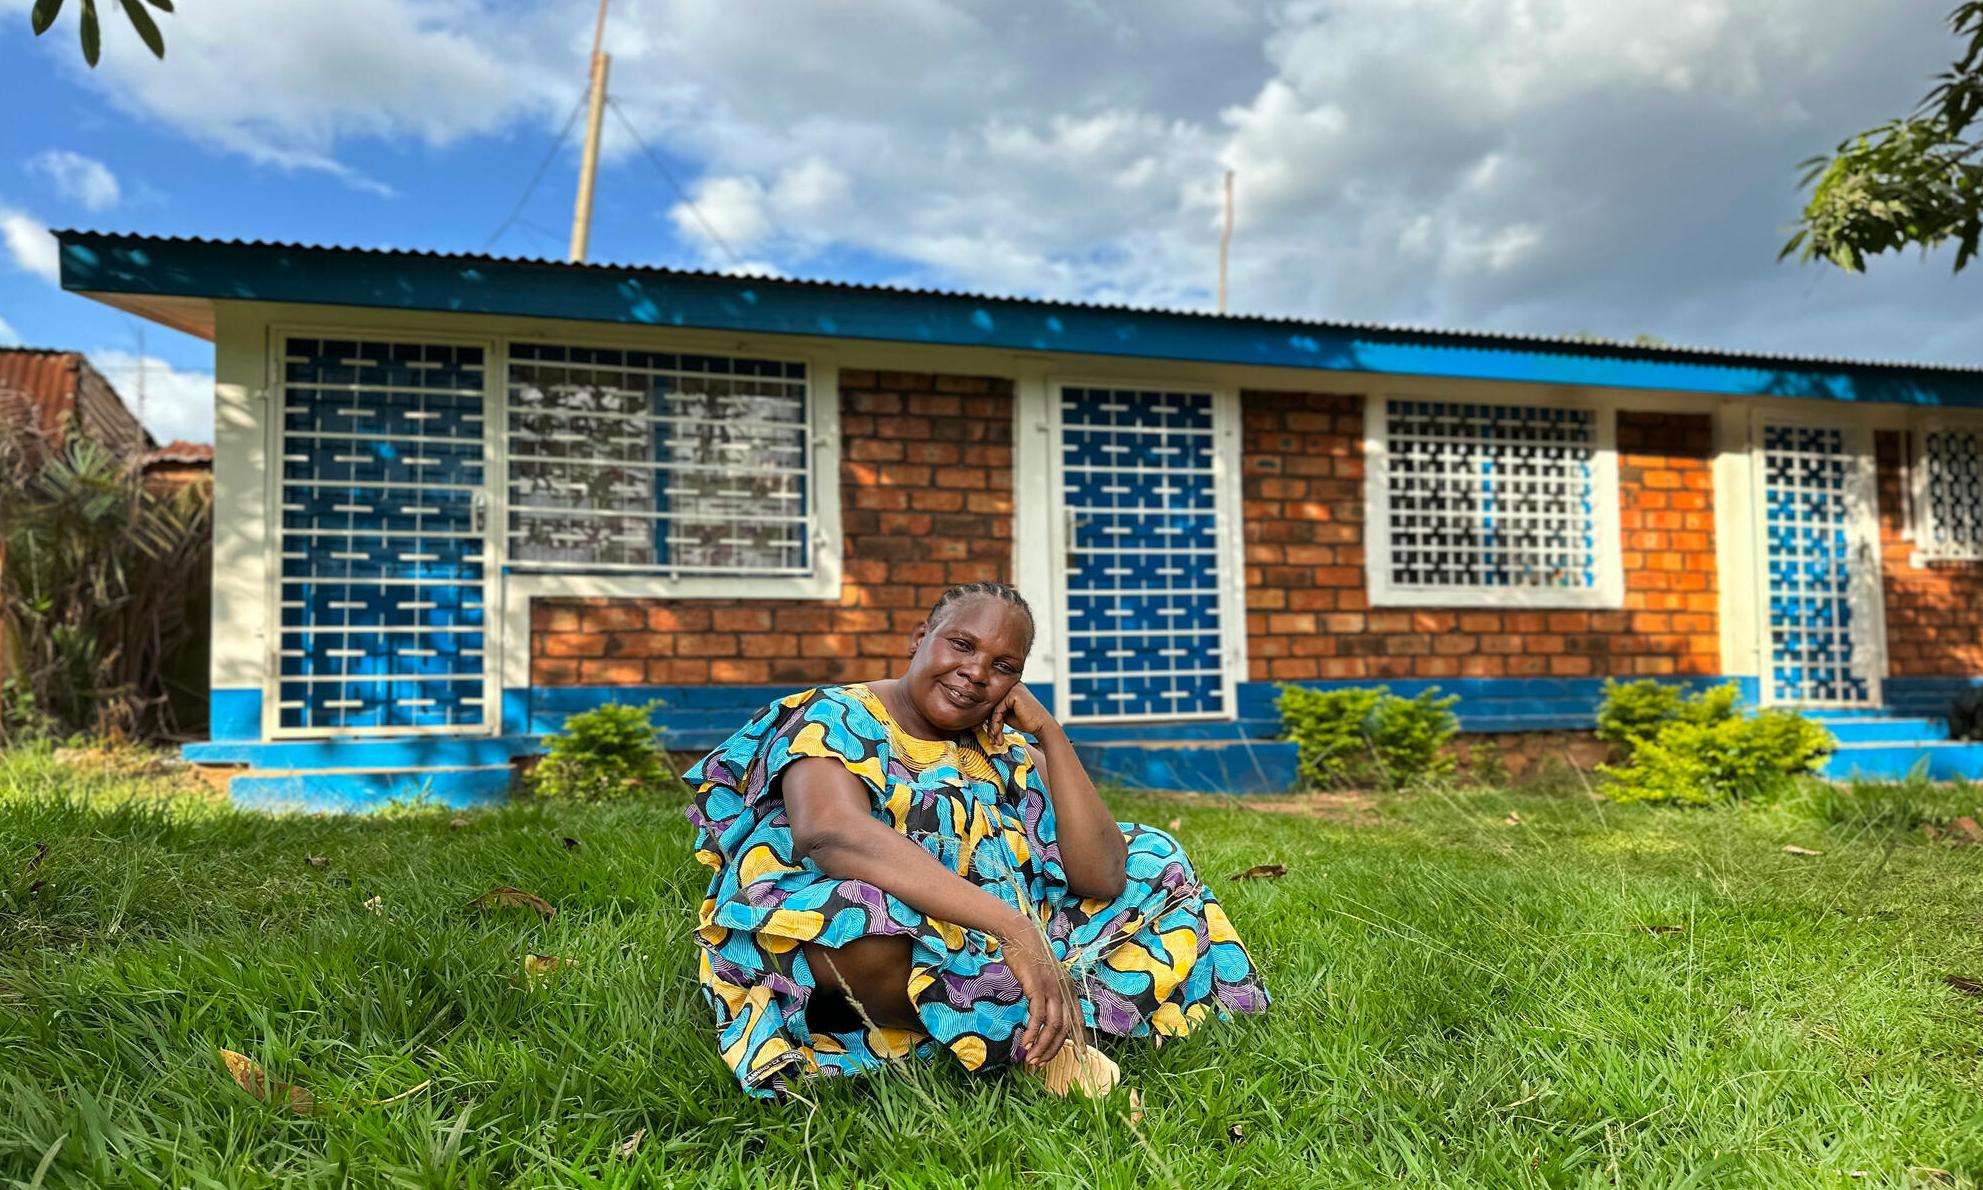 A smiling woman in brightly colored dress sits on the lawn in front of a brick building in Central African Republic.